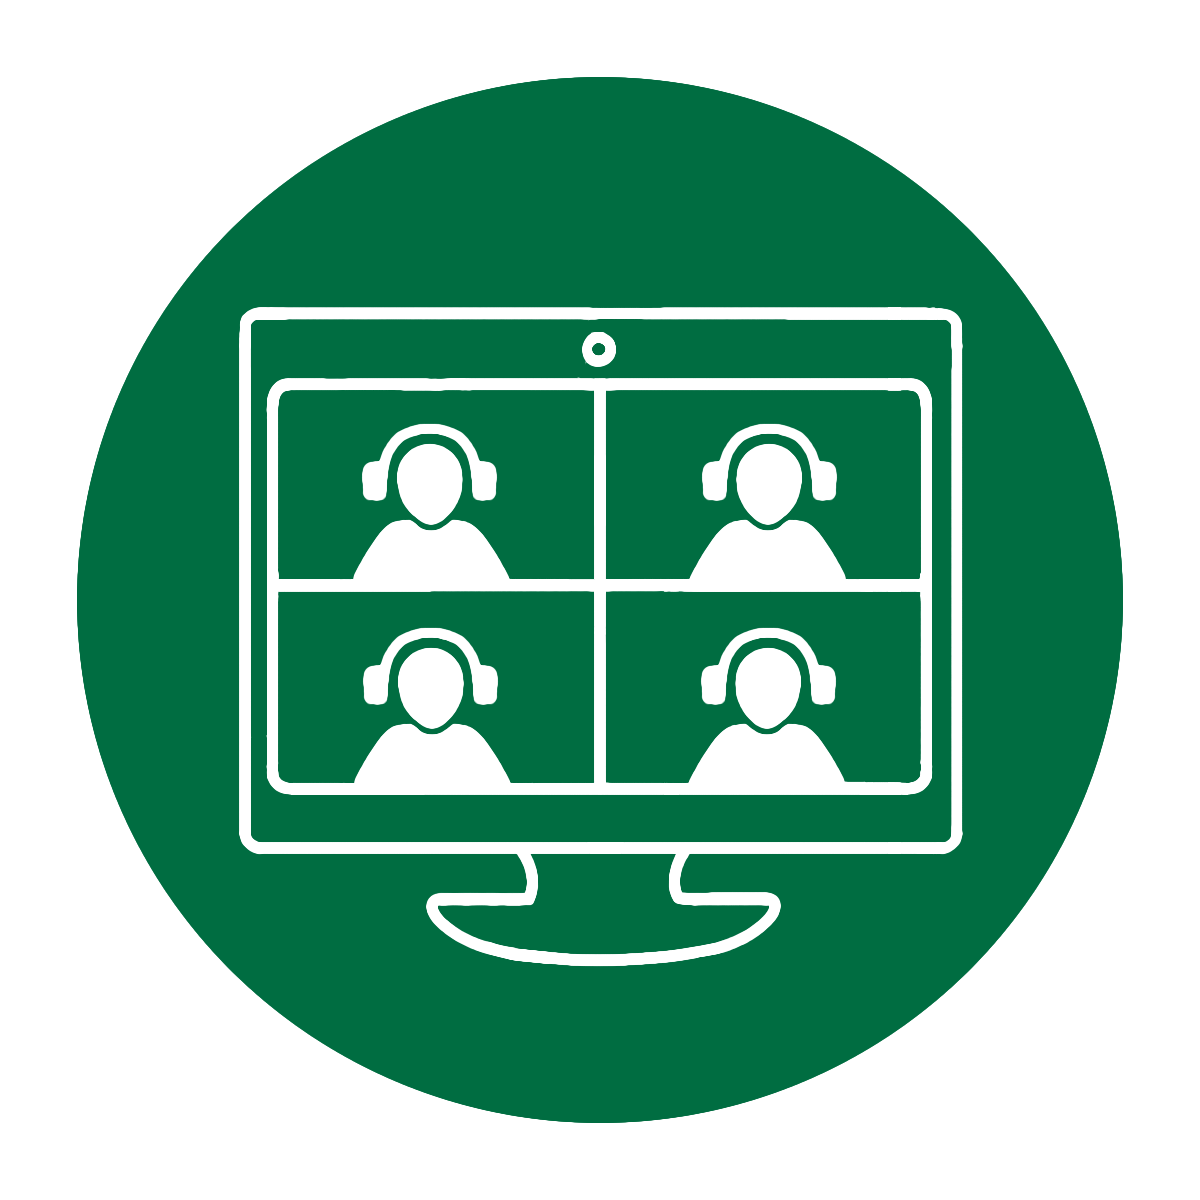 A monitor showing virtual schooling in green icon